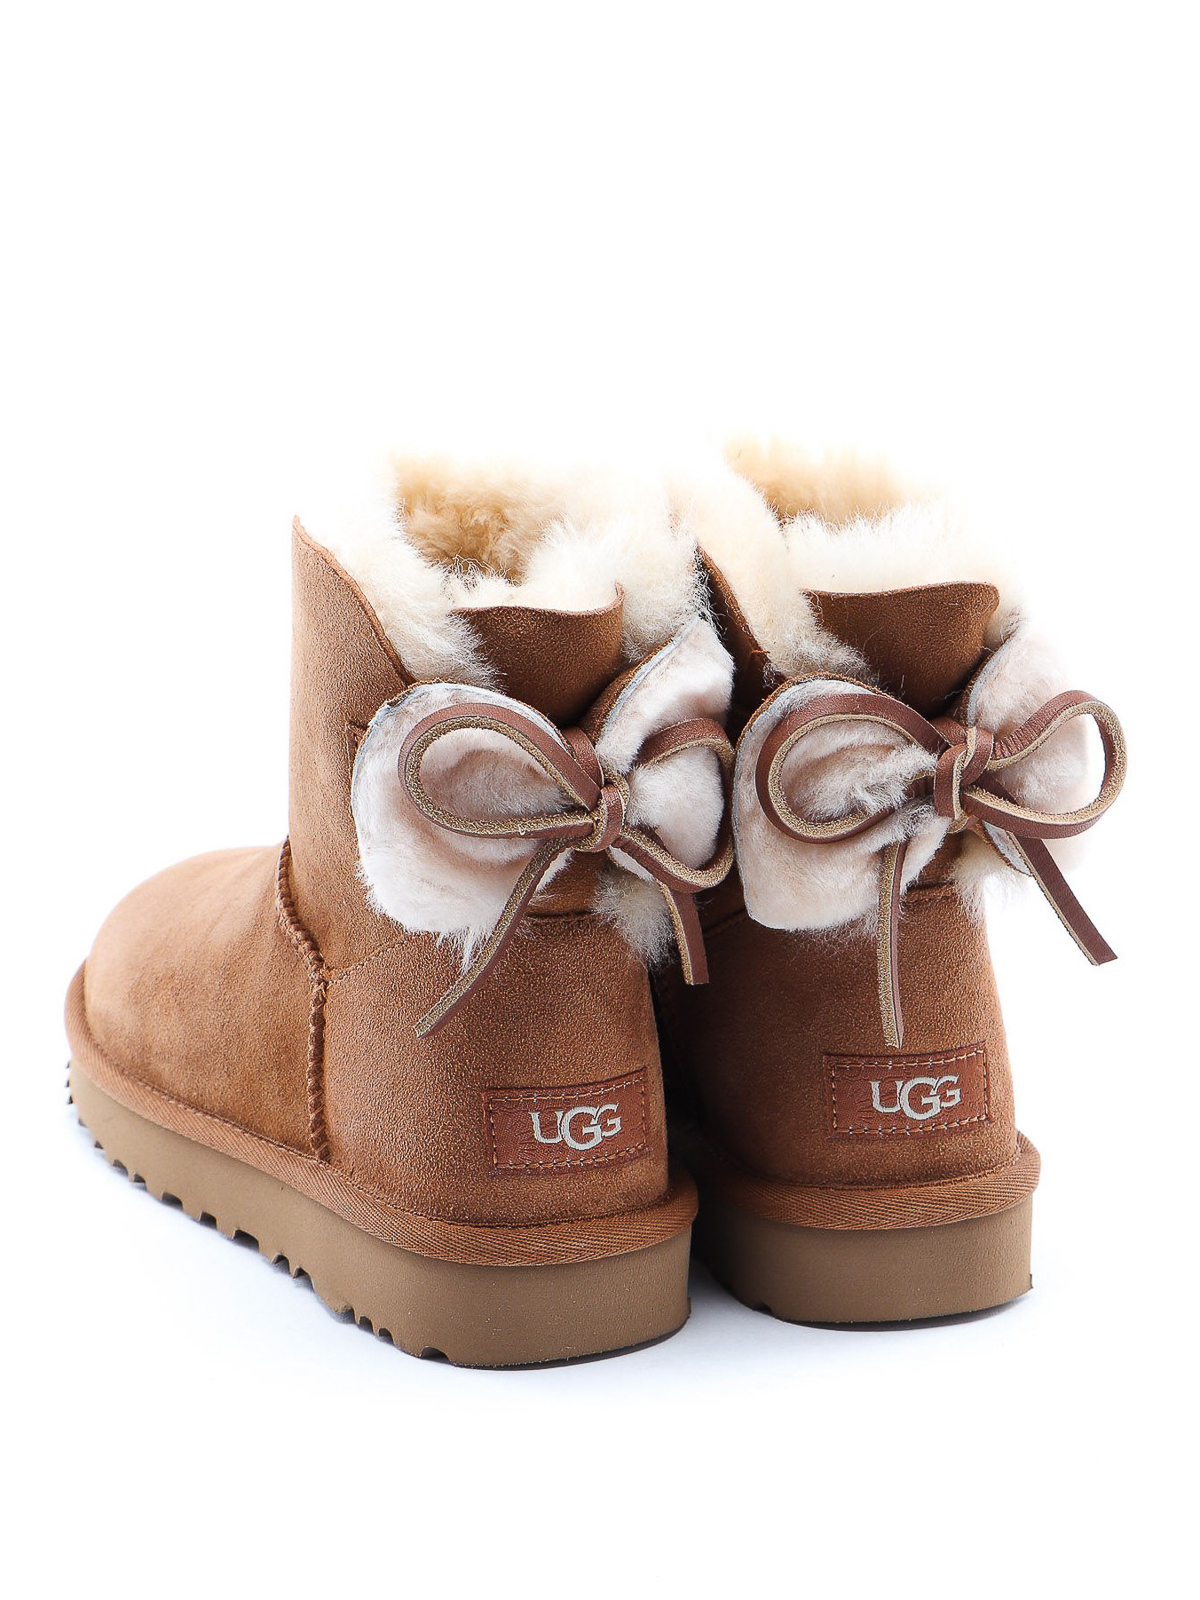 ankle uggs with bow